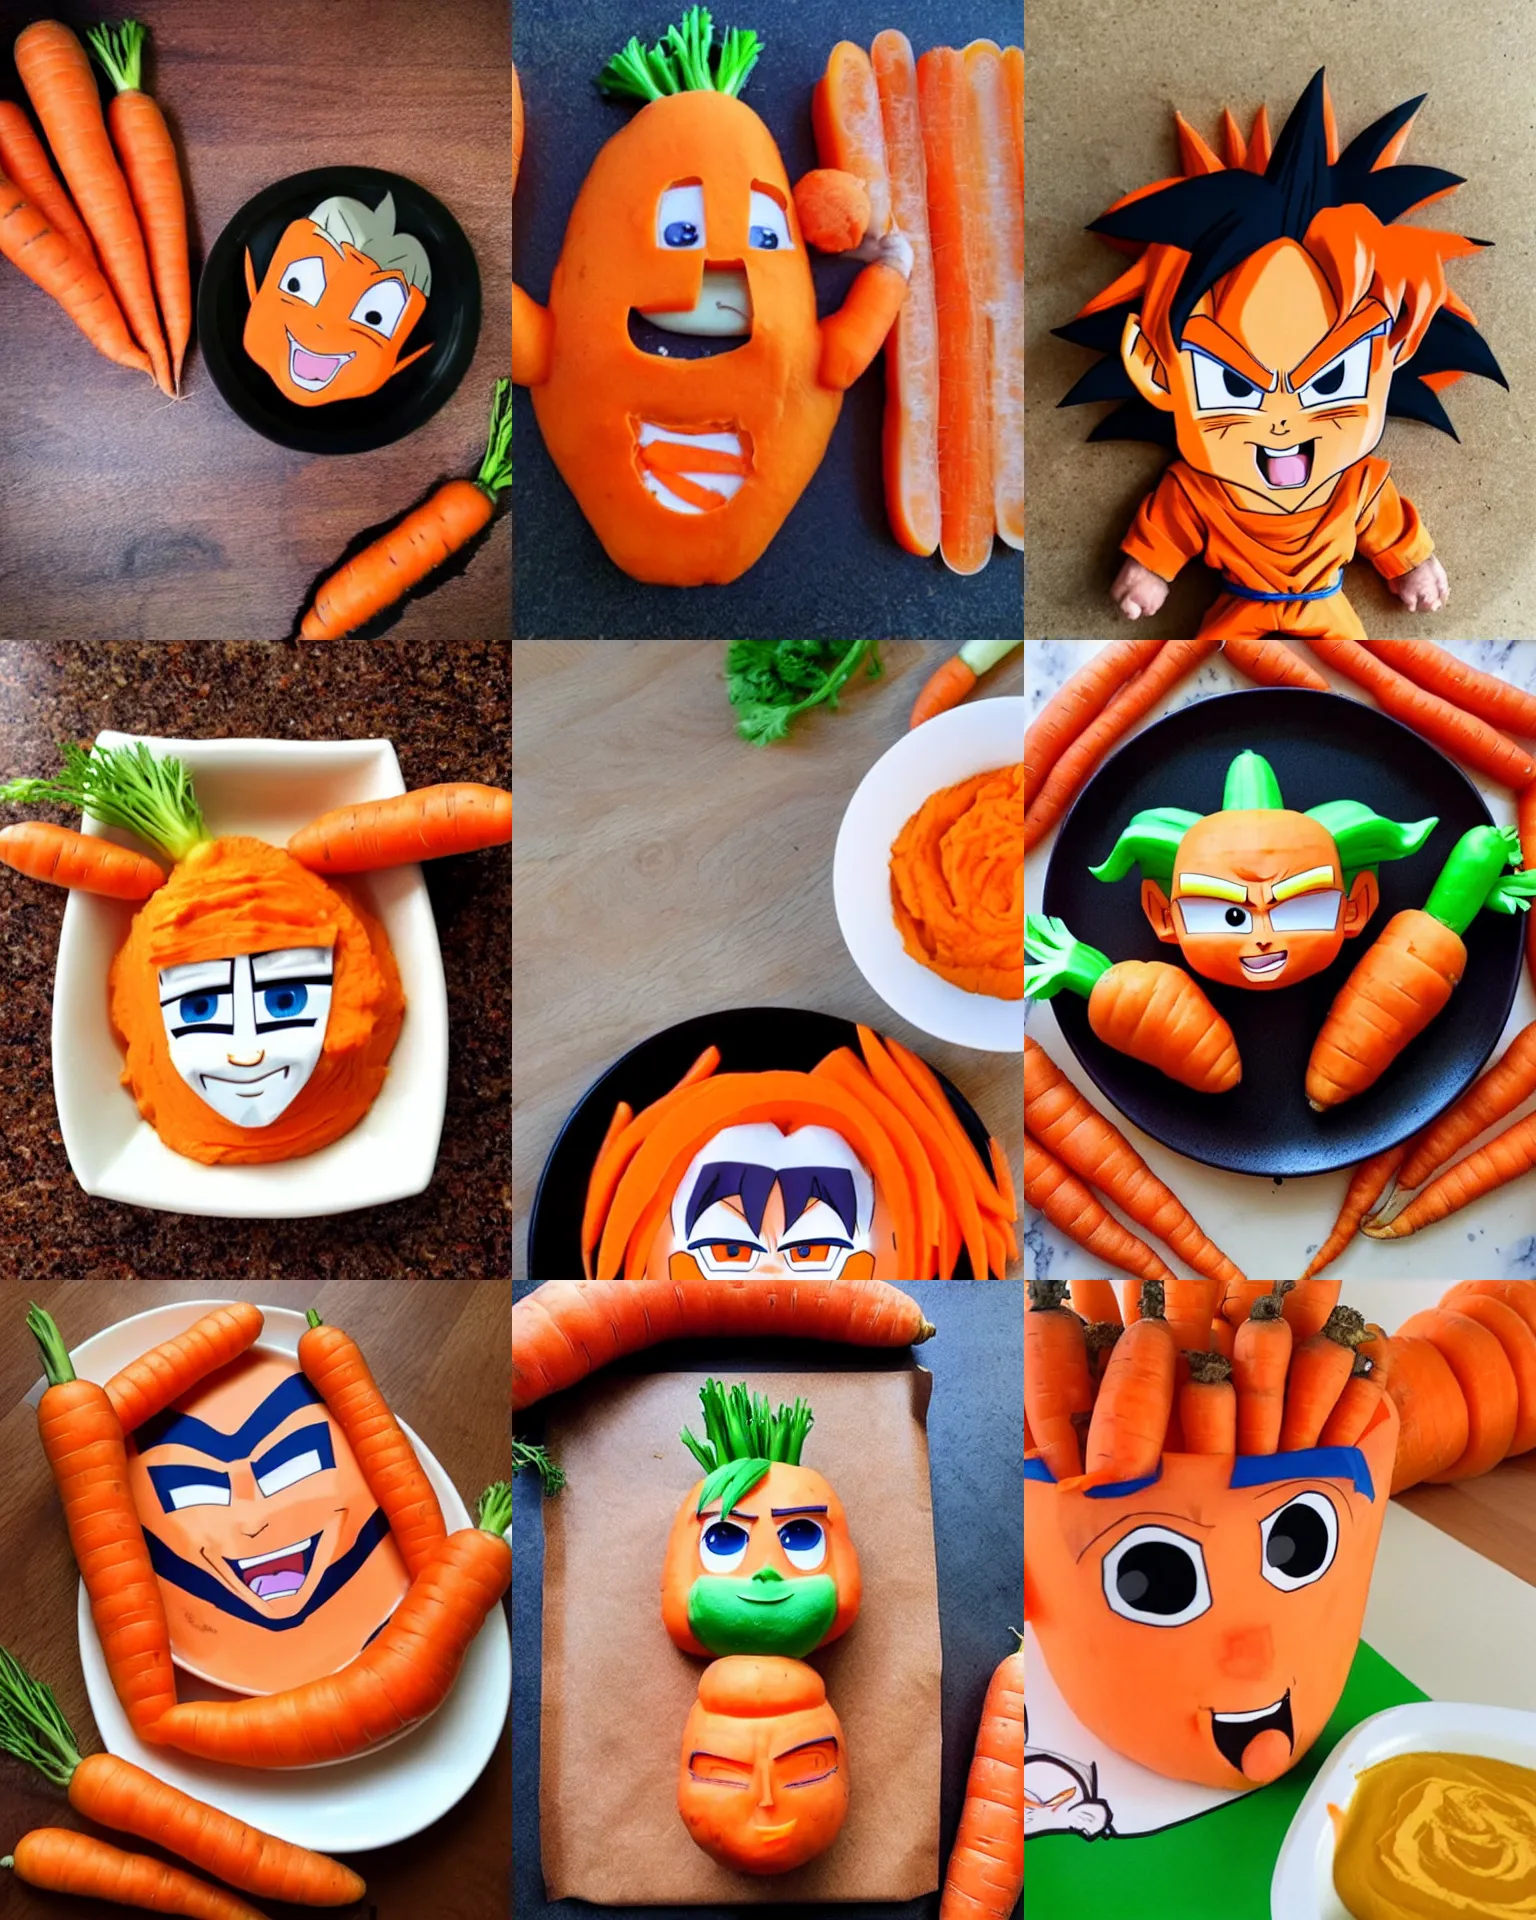 Prompt: a photo of a carrot, carrot vegetable fusion with goku from dragon ball's face on the carrot, dipping carrot in hummus